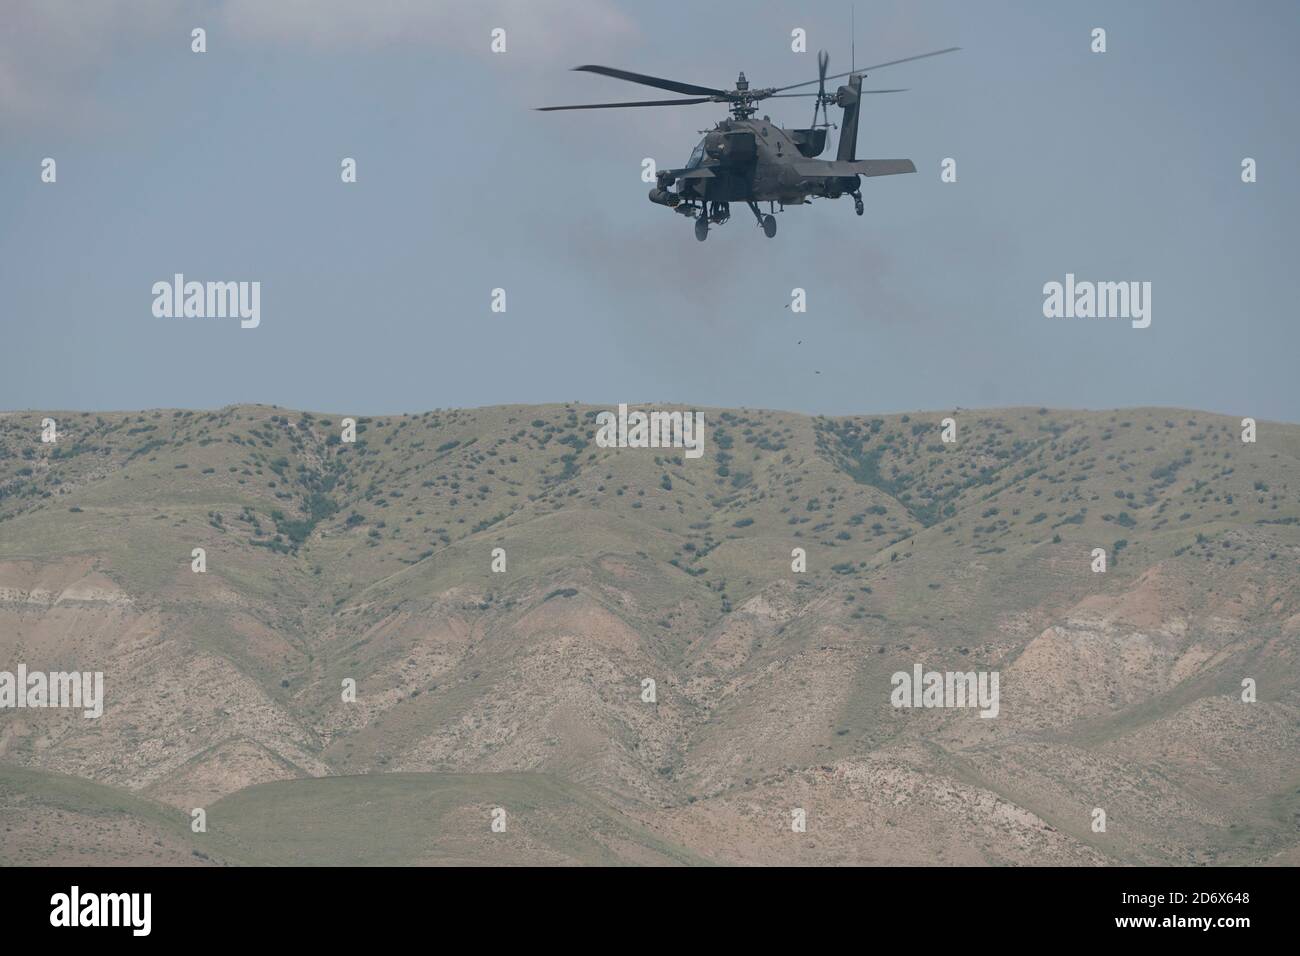 A U.S. AH-64 Apache helicopter fires away during a call to fire training with U.S. Soldiers from the 4th Squadron, 2d Cavalry Regiment and 12th Combat Aviation Brigade at the Vaziani Training Area, Georgia, Sept. 14, 2020.     The 4/2 Soldiers successfully completed their training exercise at the Vaziani Training Area in Georgia from September 7th to September 18th. Designed to enhance regional partnerships and increase U.S. force readiness and interoperability, the exercise allows participants to conduct sniper and demo ranges, situational training exercises, live-fire exercises and combined Stock Photo